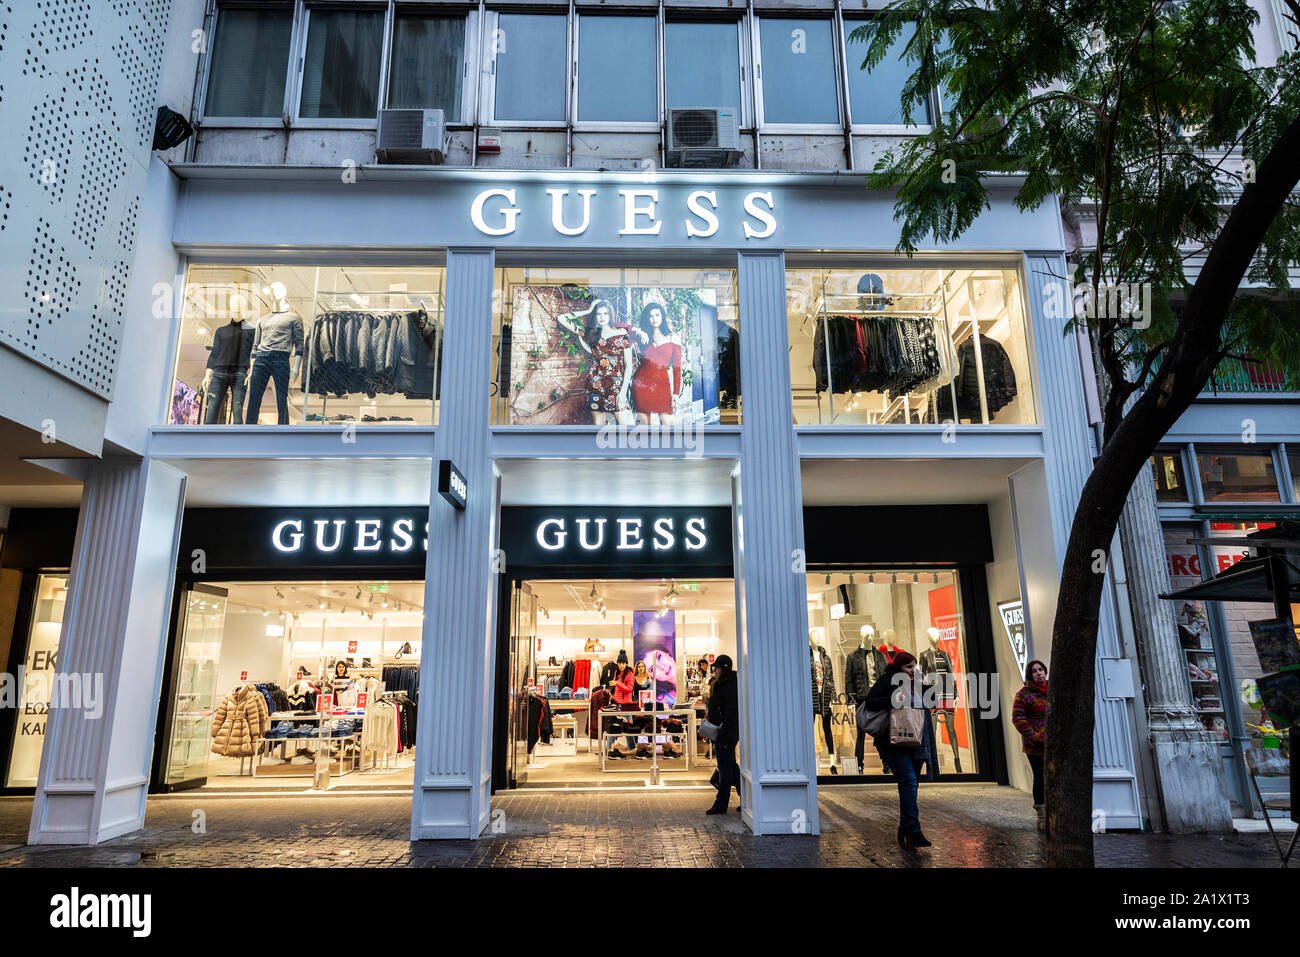 Guess Ad High Resolution Stock Photography and Images - Alamy